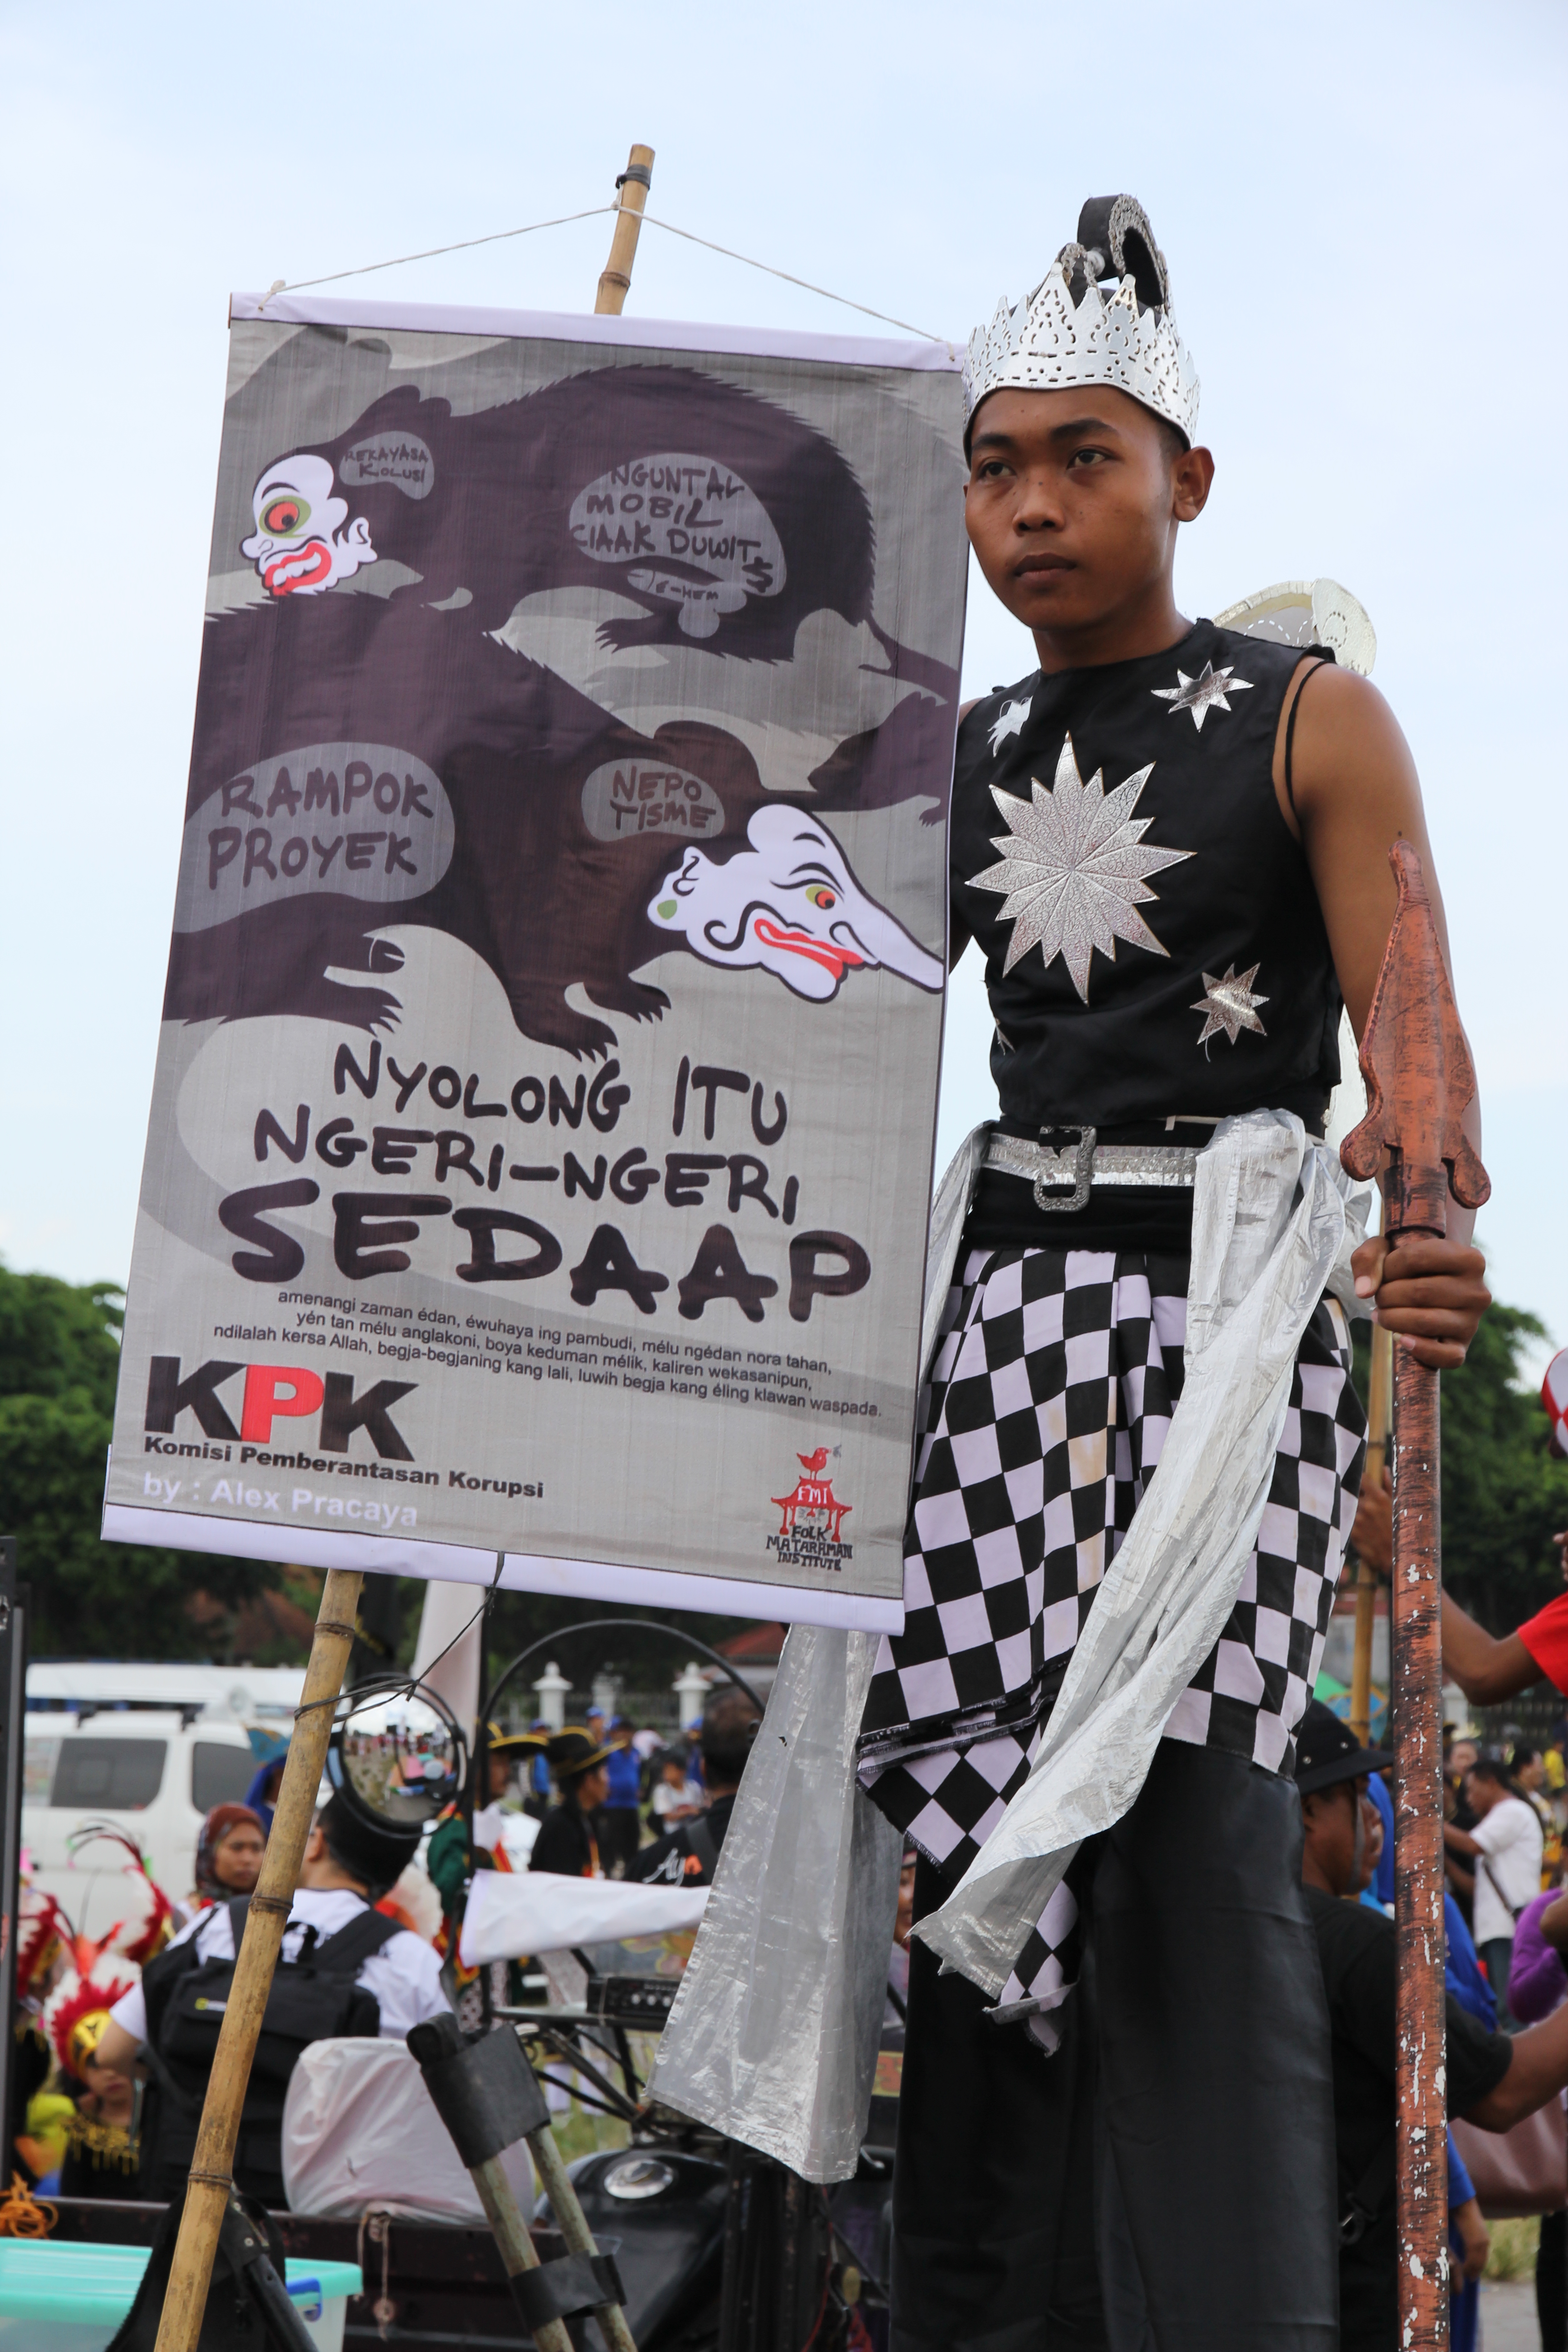 Man in traditional garb holding sign during anti-corruption protest in Indonesia.